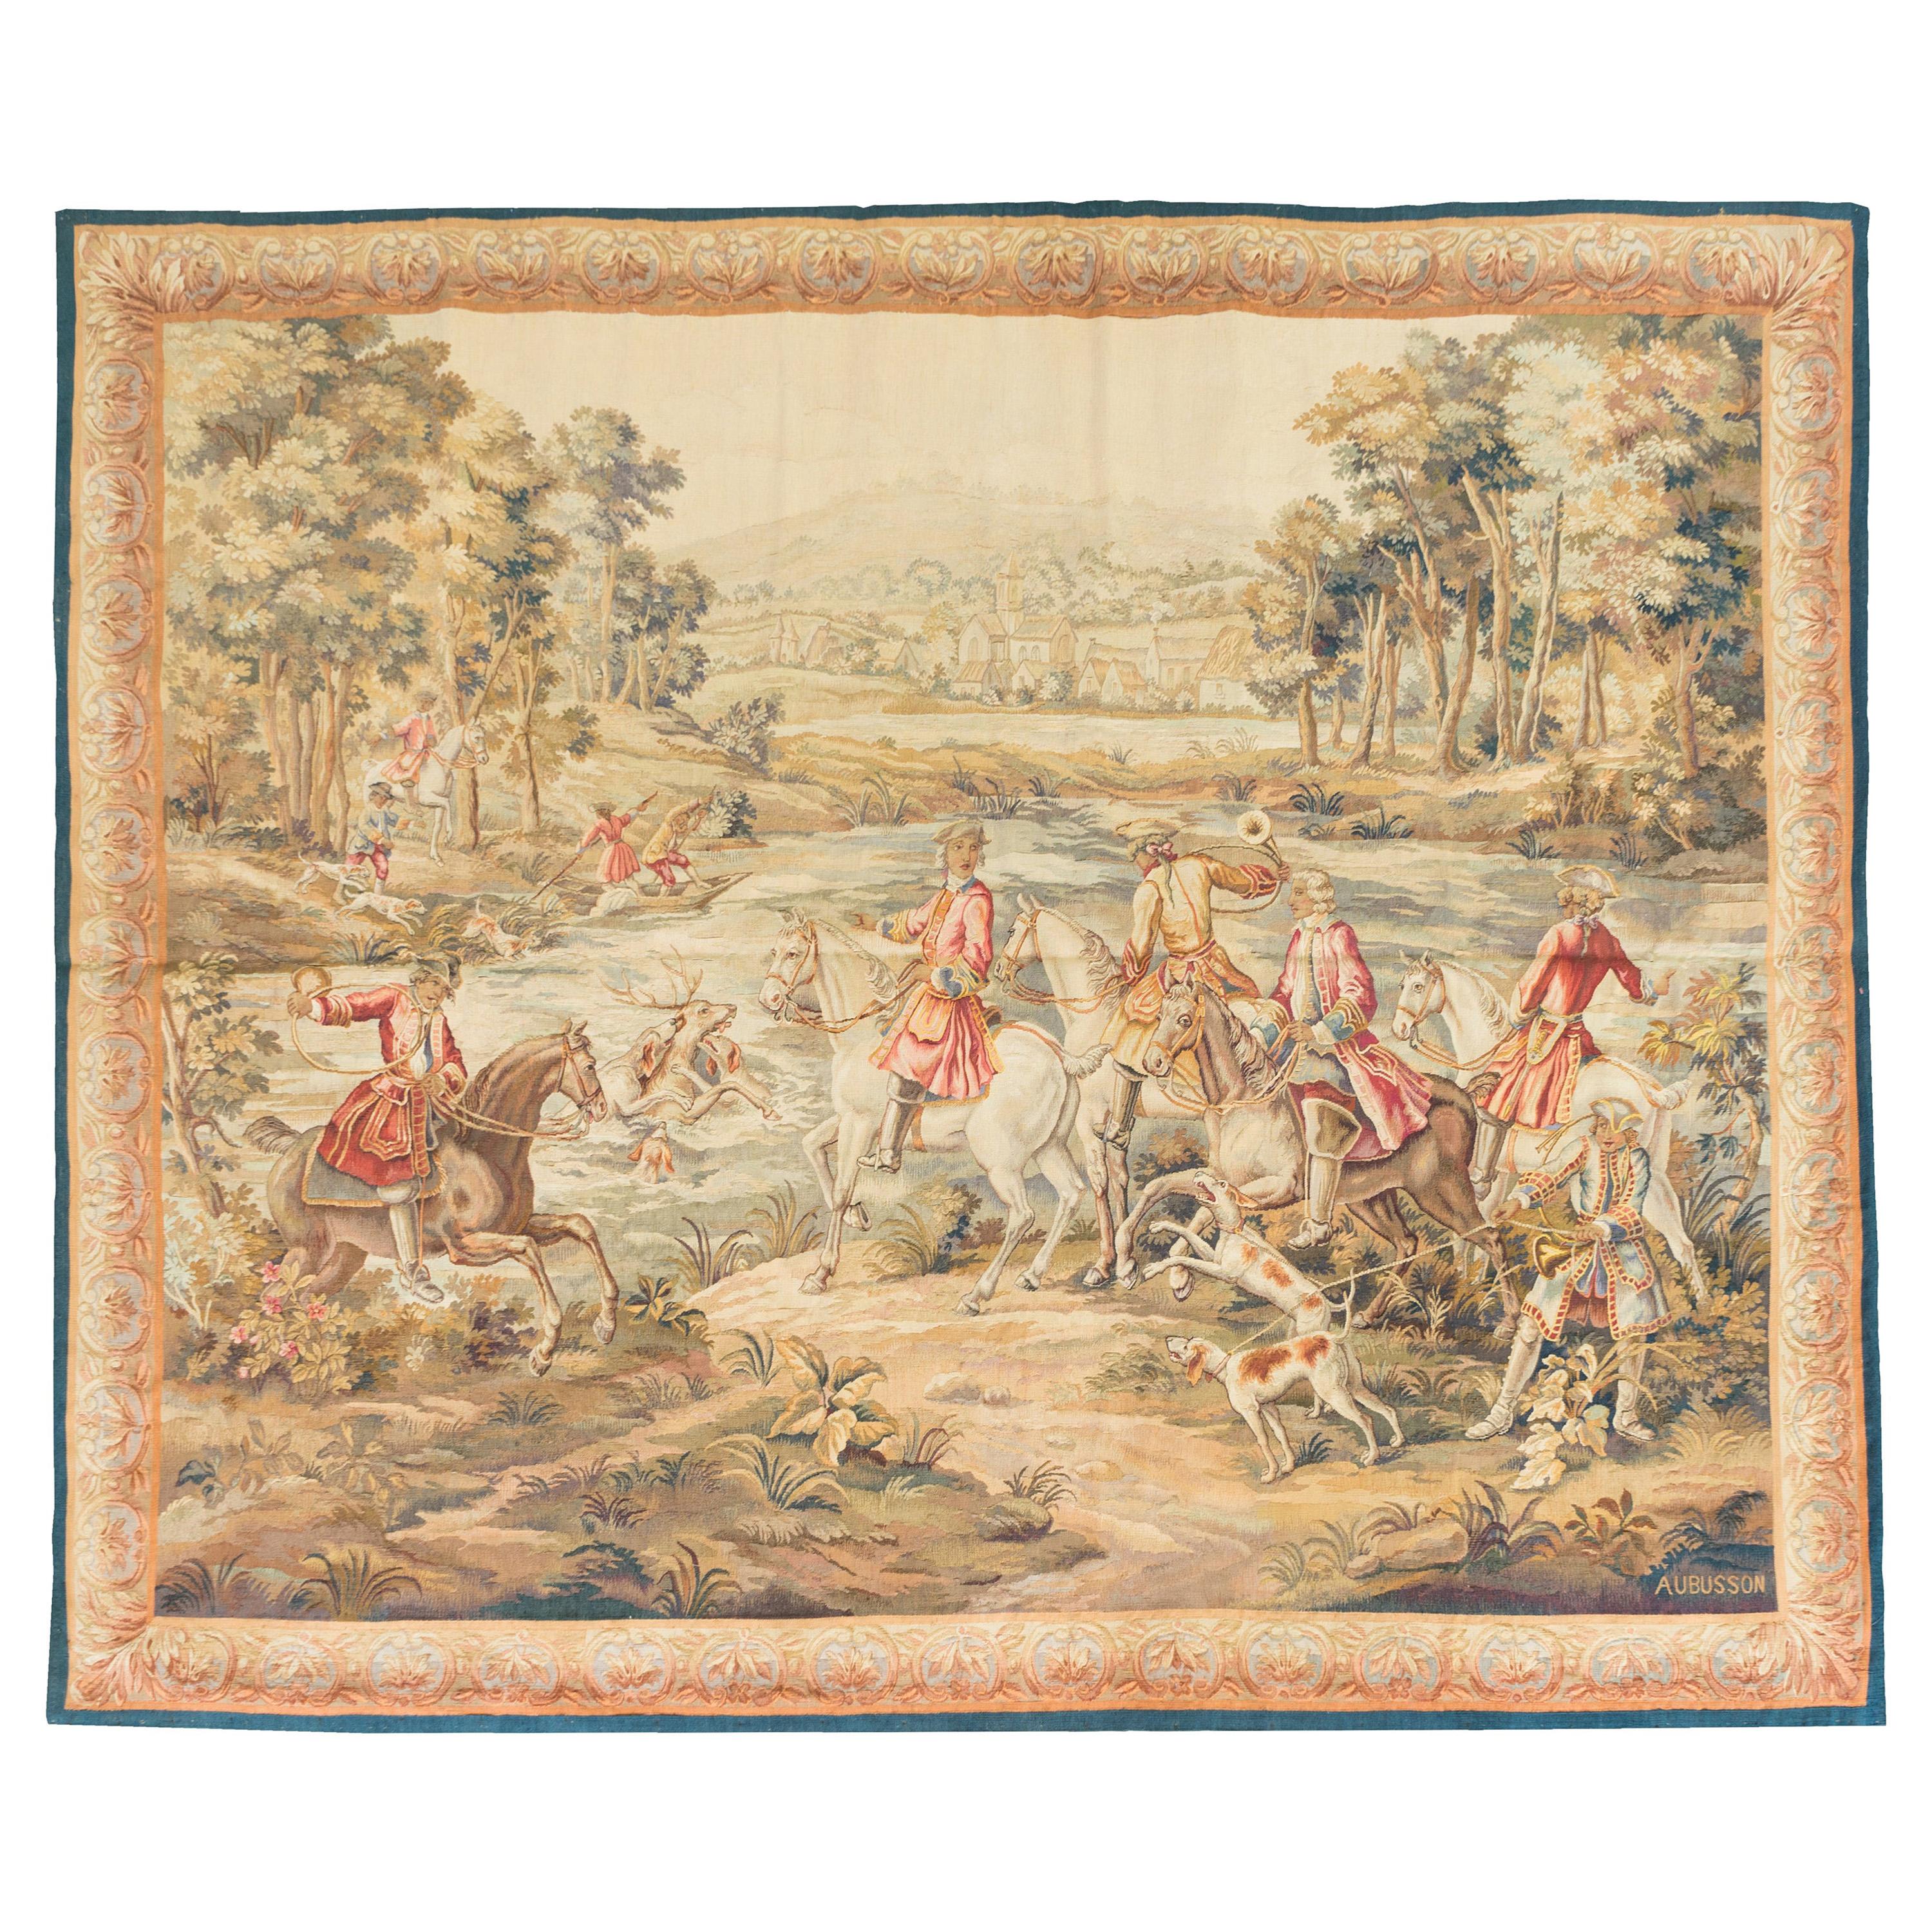 Antique 19th Century Square French Aubusson Hunting Tapestry Signed 'Aubusson'